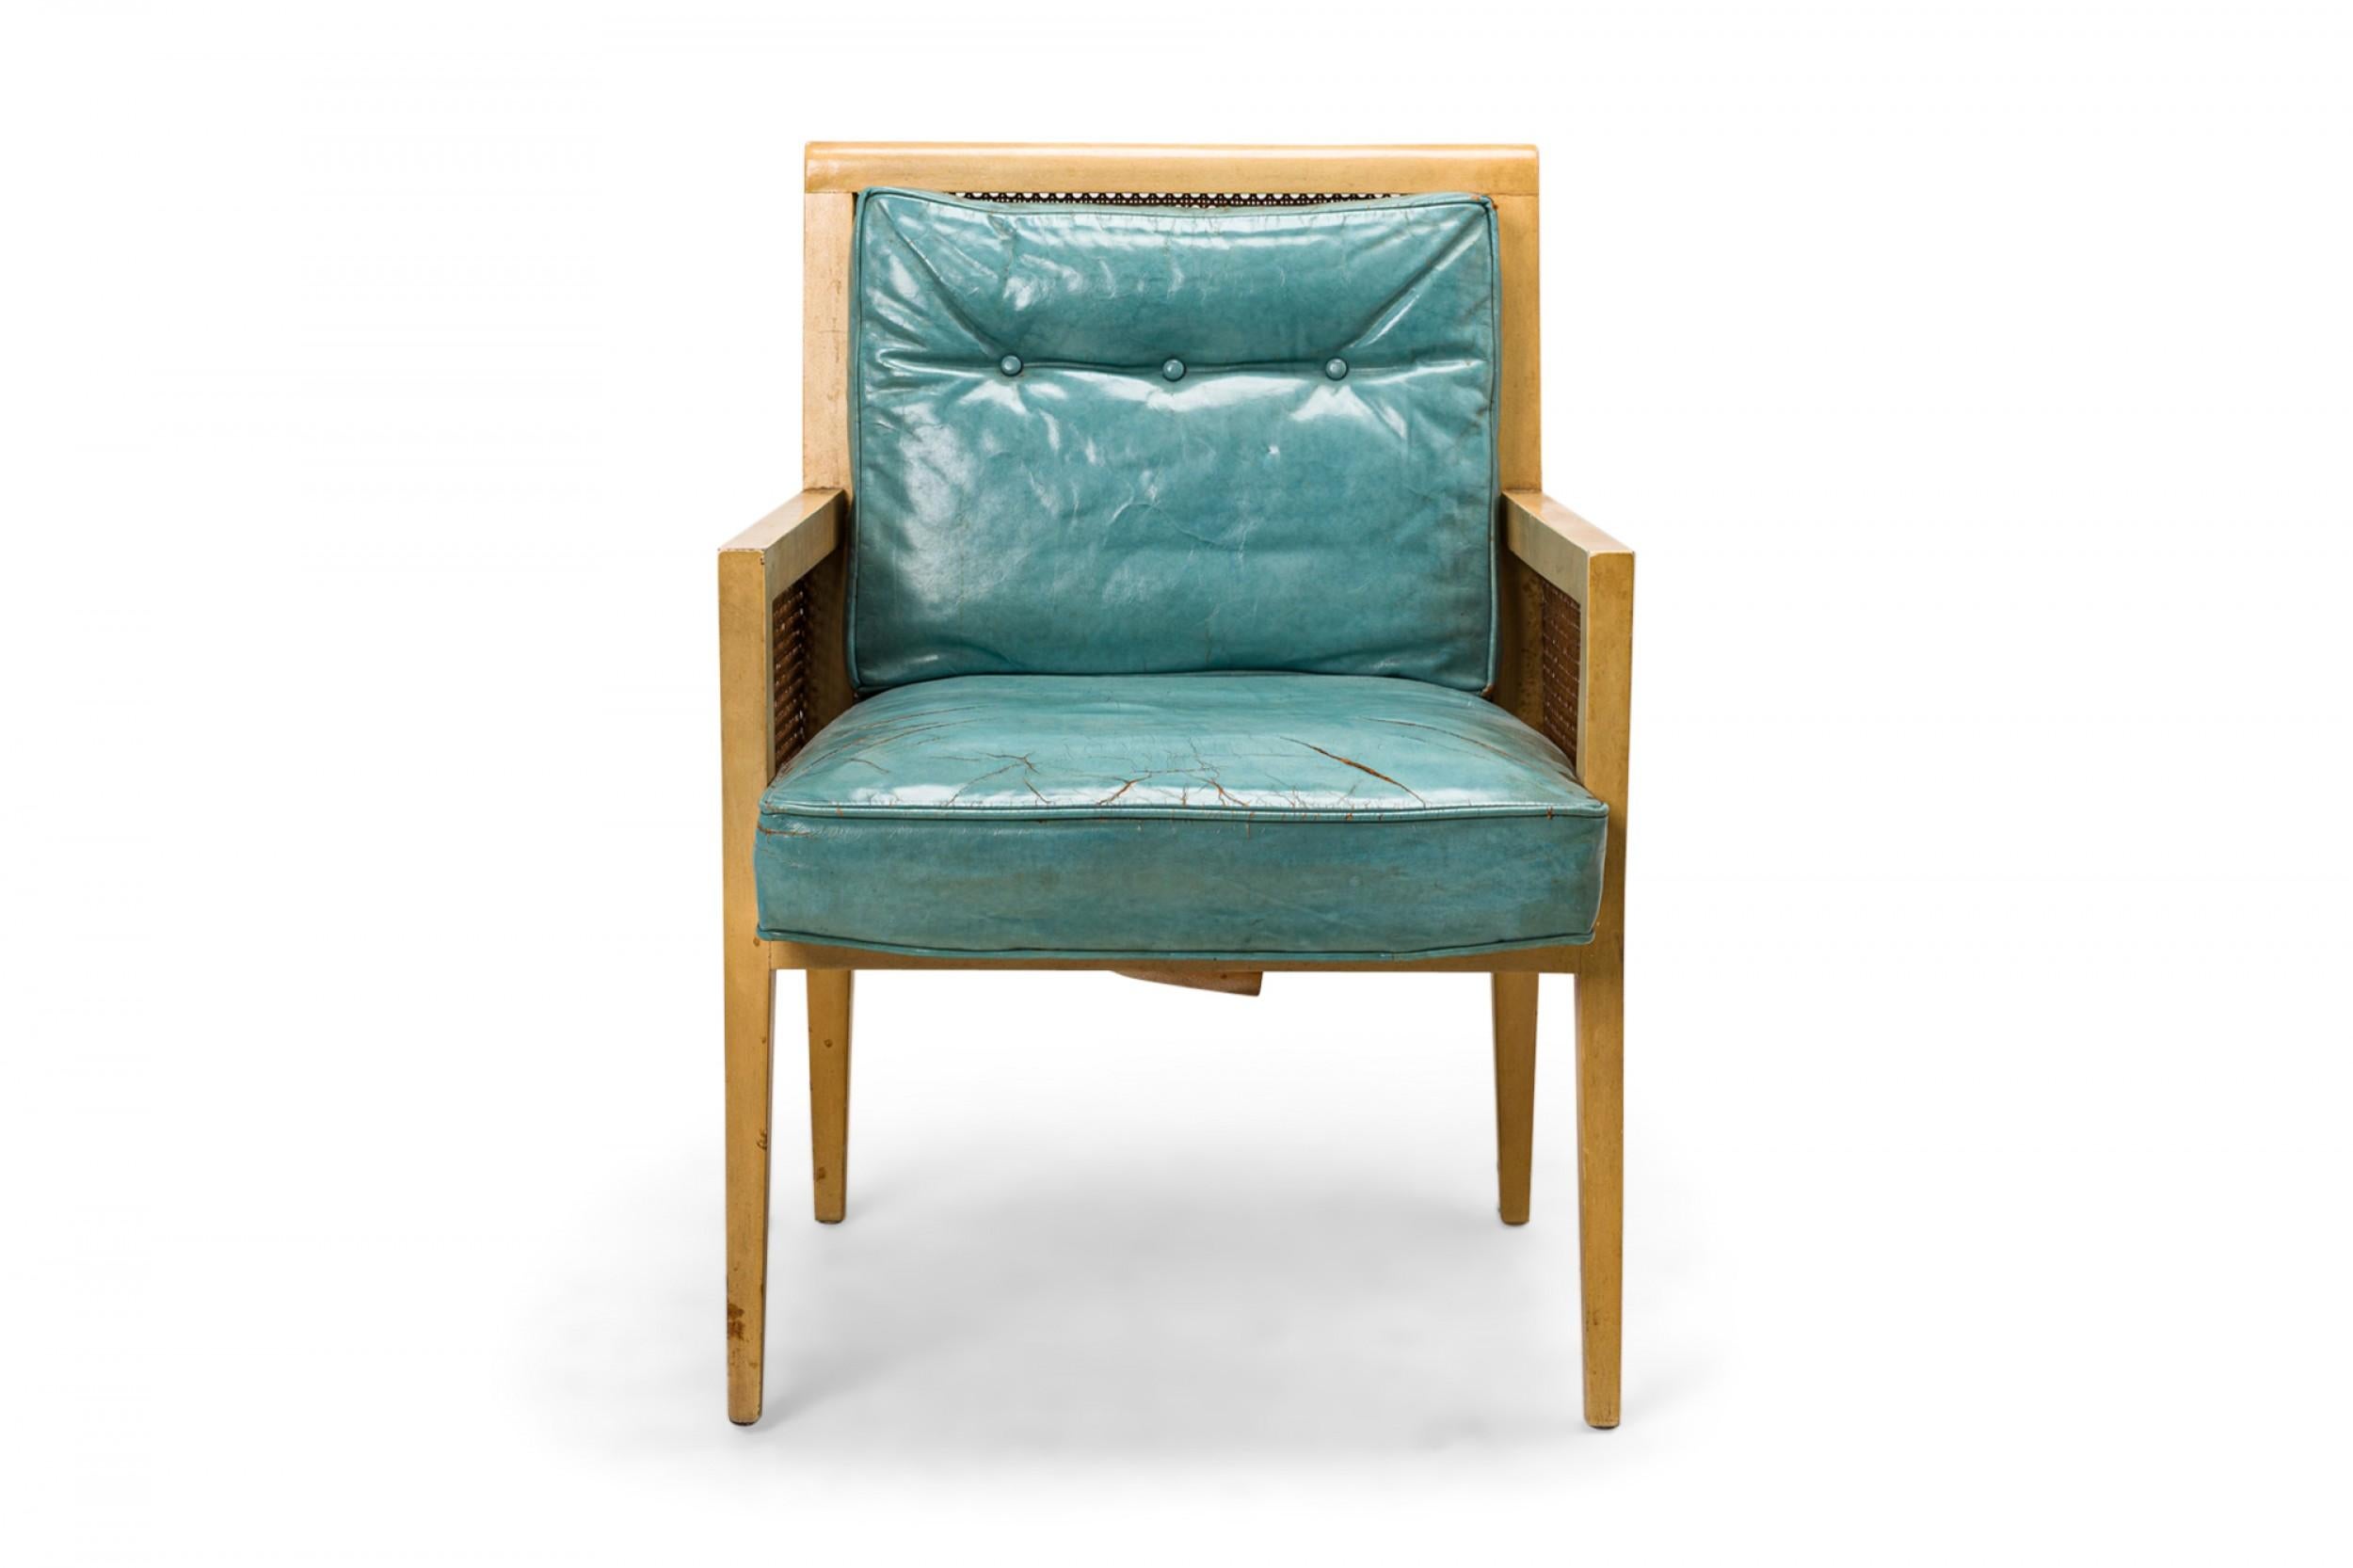 PAIR of American Mid-Century lounge armchairs with blond wood frames, caned sides and backs, and light blue leather upholstered seat and back cushions with button tufted back detail. (PRICED AS PAIR)
